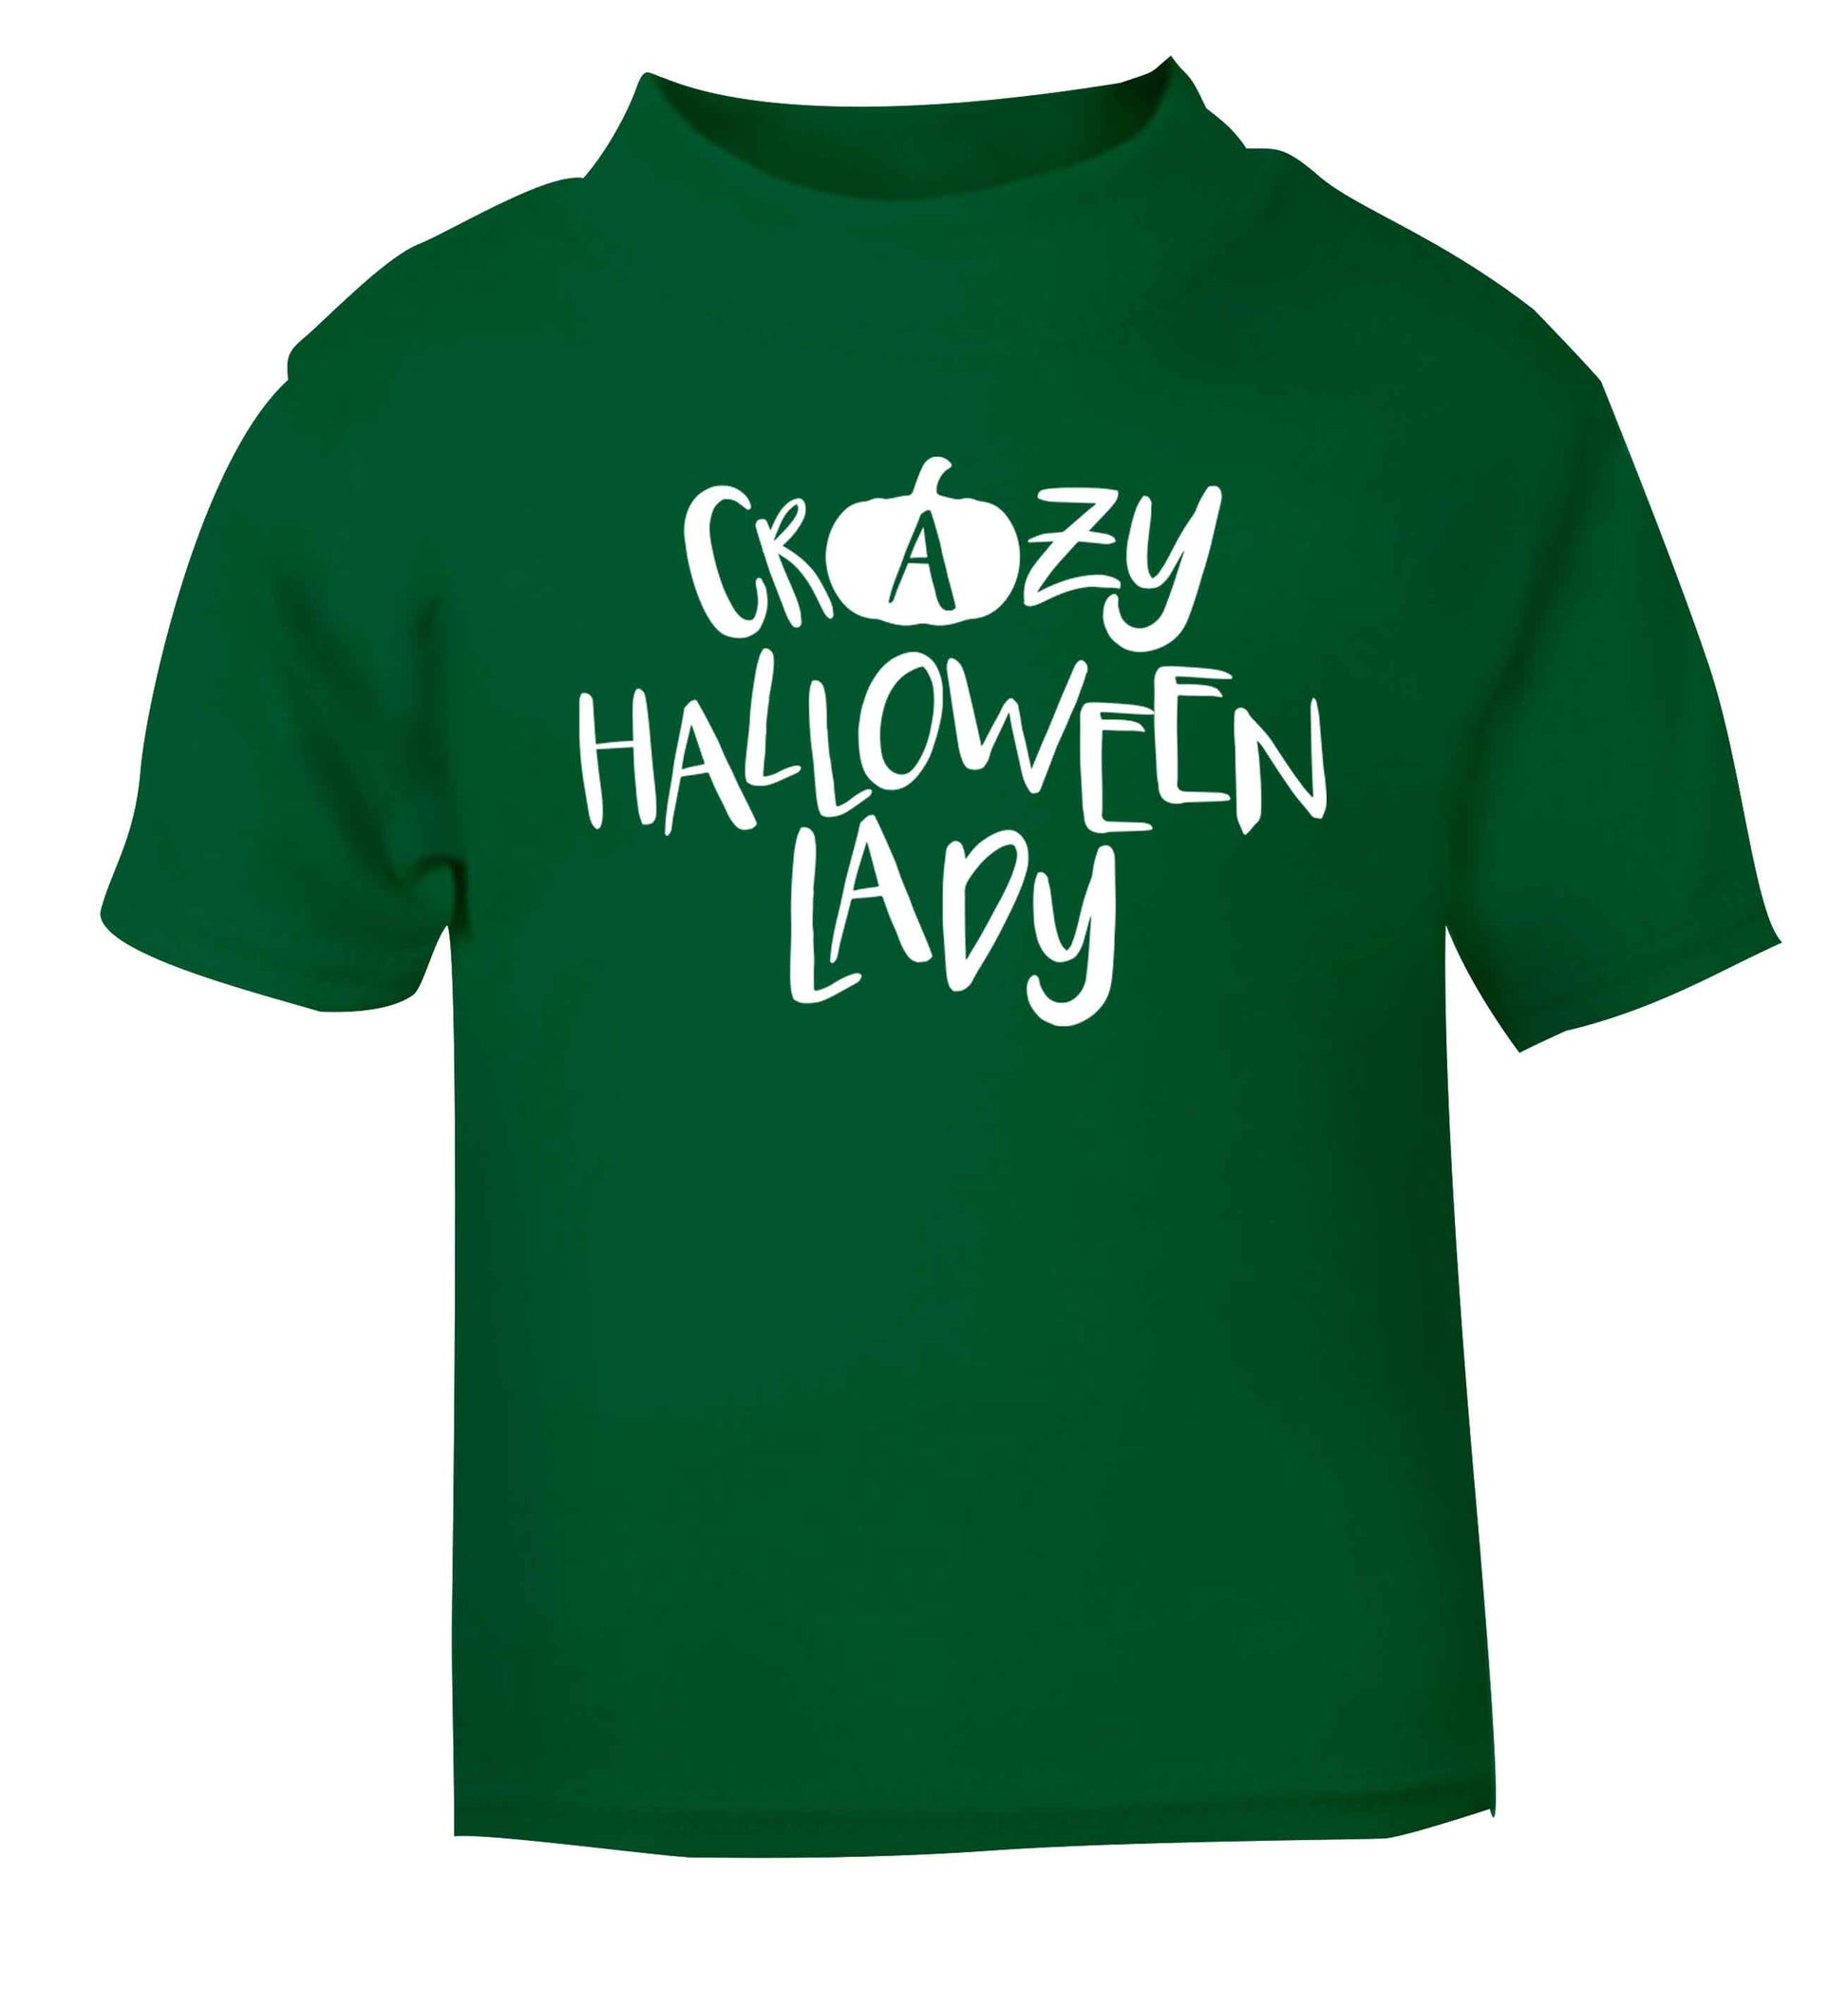 Crazy halloween lady green baby toddler Tshirt 2 Years